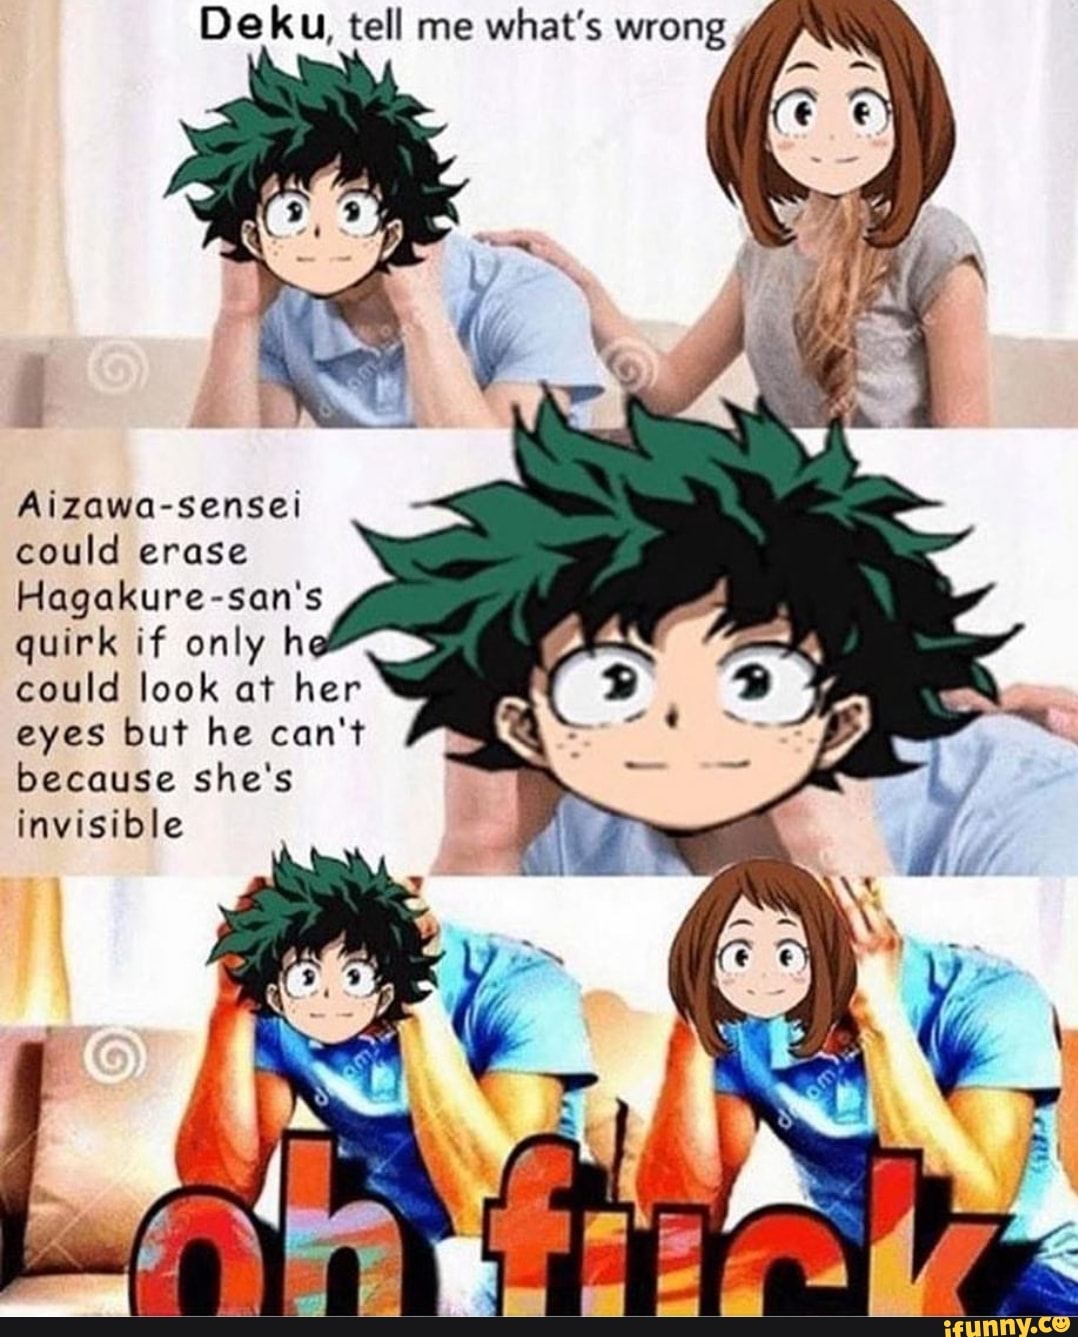 Deku, tell me what's wrong Hagakure-san's quirk if only h could look of ...